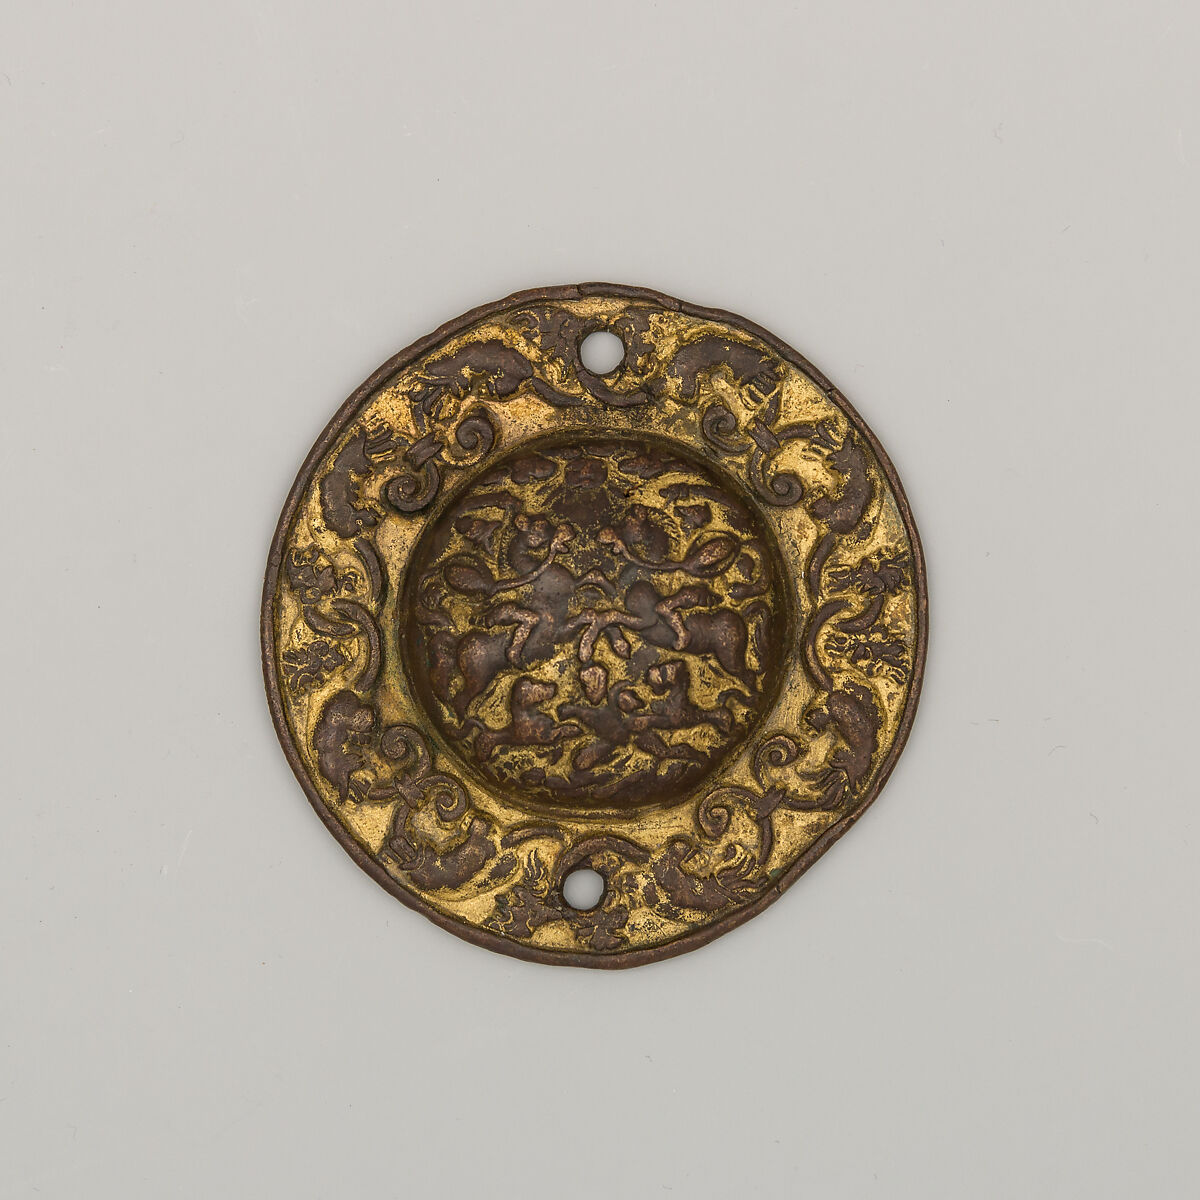 Bit Boss, Copper alloy, gold, German, possibly Augsburg 